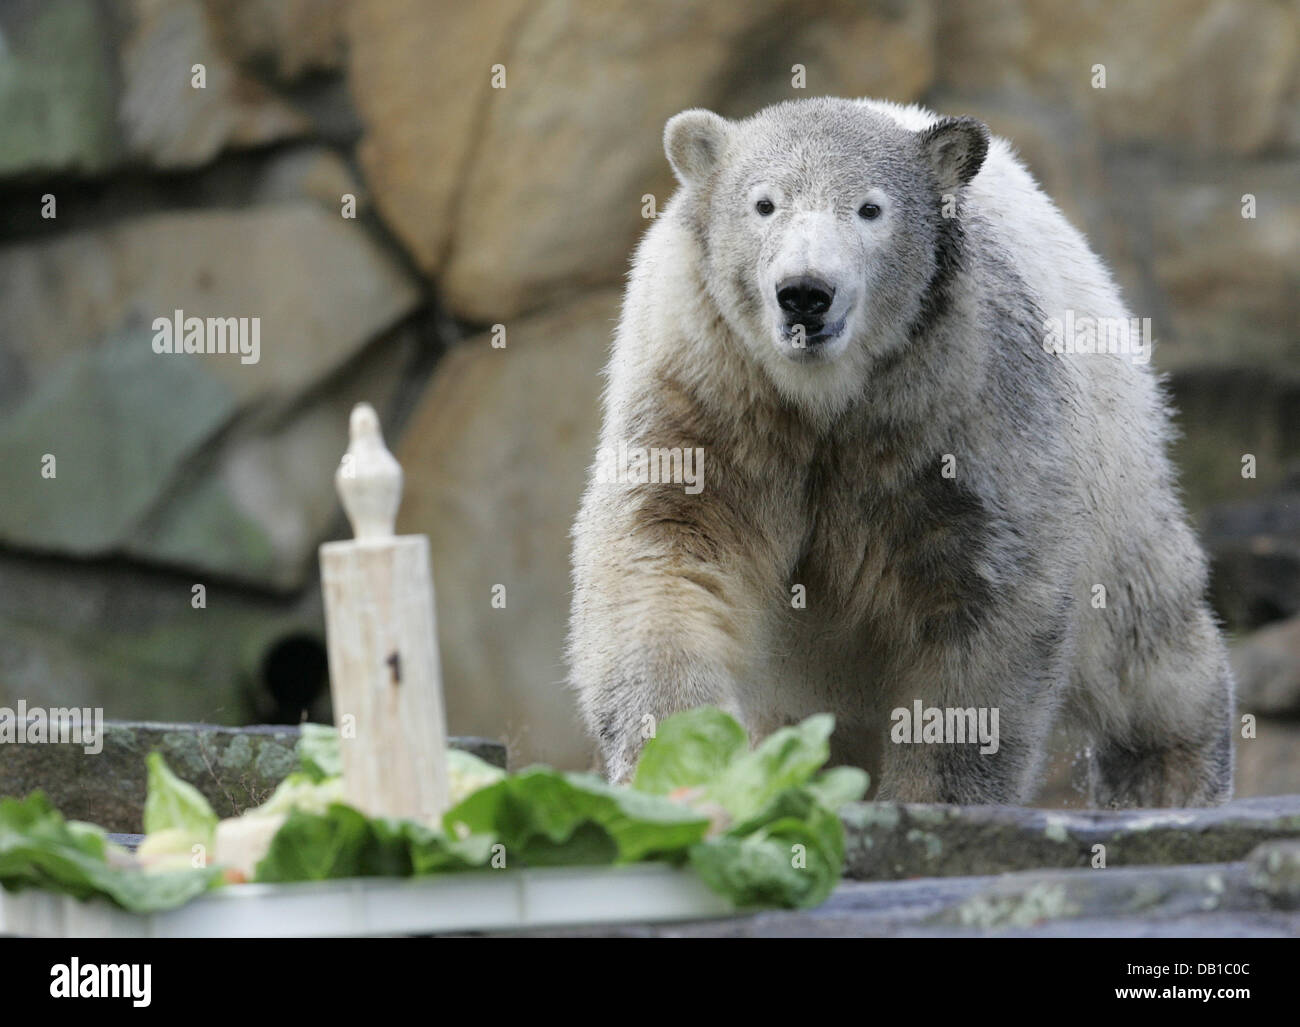 Polar bear Knut approaches the wooden candle on its special cake during its first birthday at the zoo in Berlin, 05 December 2007. More than 2.5 million people have already come to see the polar bear. In its first year of life Knut increased its weight from 810 gr to 110 kg. Photo: Rainer Jensen Stock Photo